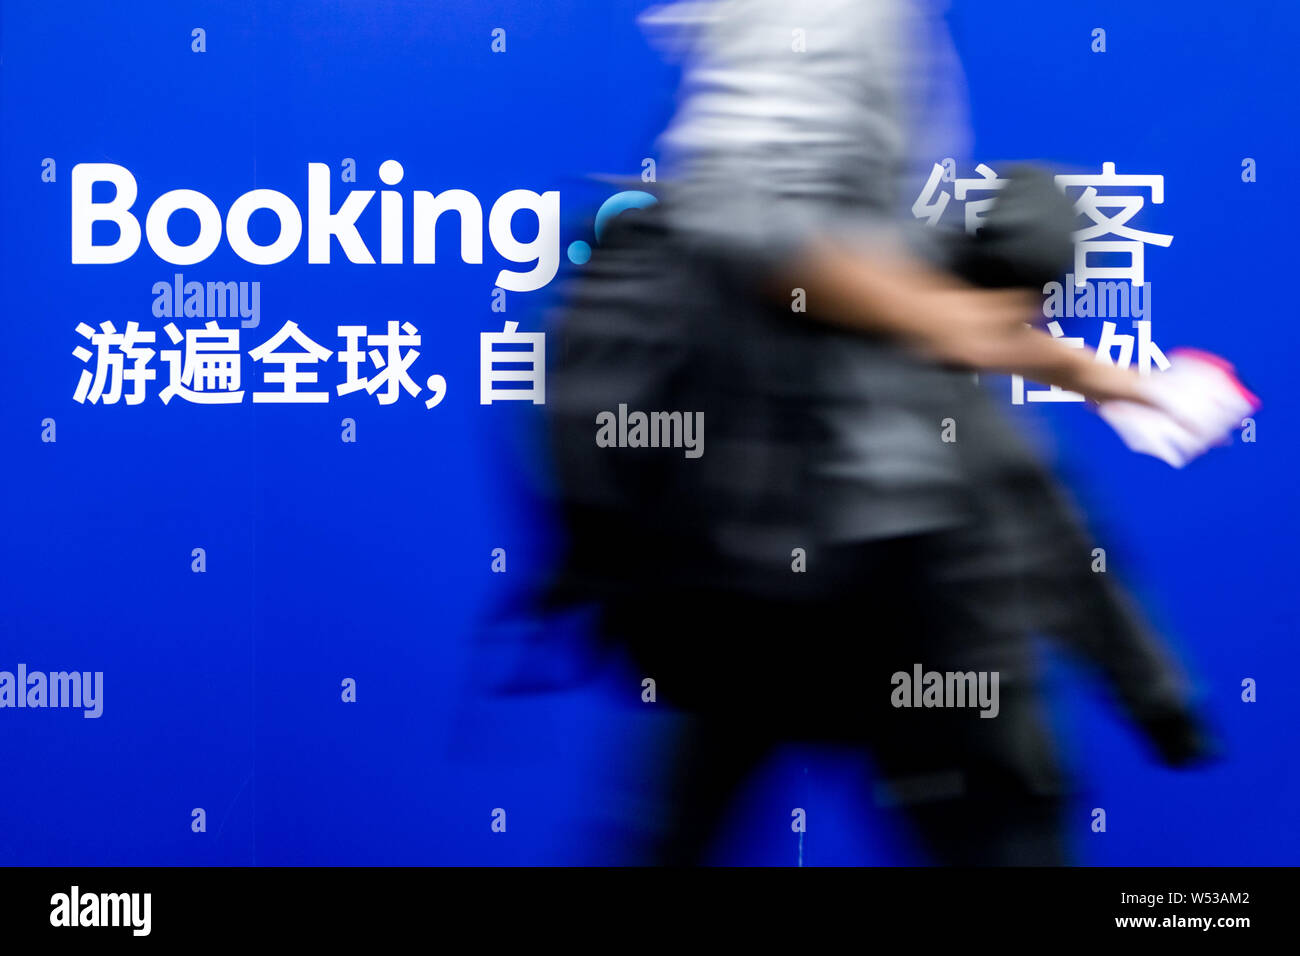 A passenger walks past an advertisement for online hotel reservation site Booking.com at a metro station in Shanghai, China, 29 December 2018.   Booki Stock Photo